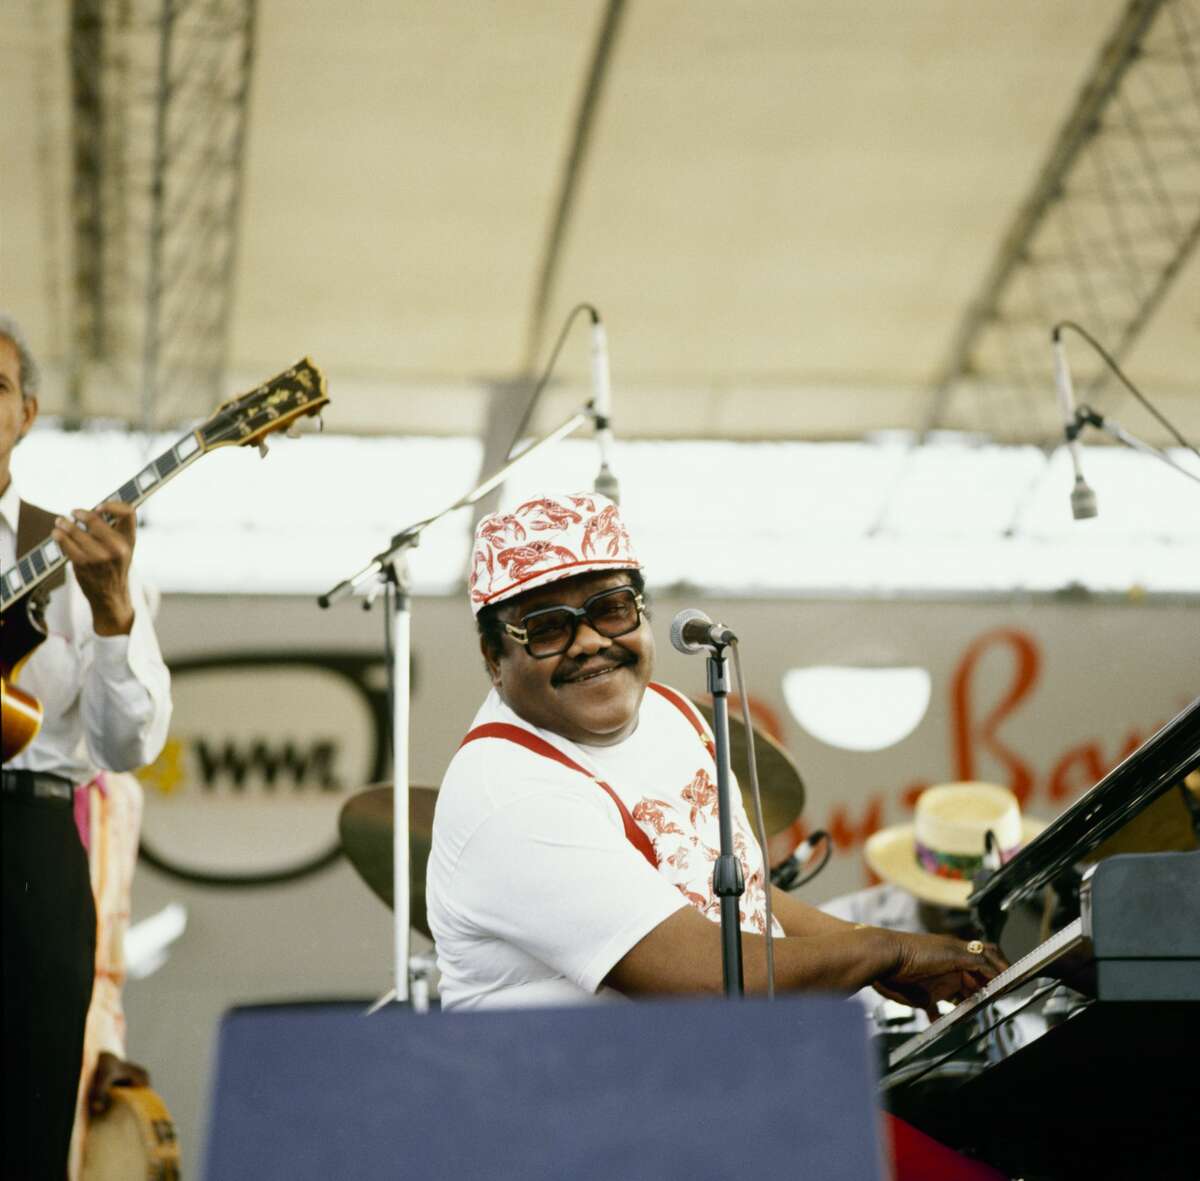 Fats Domino performs on stage at the New Orleans Jazz and Heritage Festival in New Orleans, Louisiana on April 25, 1993. (Photo by David Redfern/Redferns)